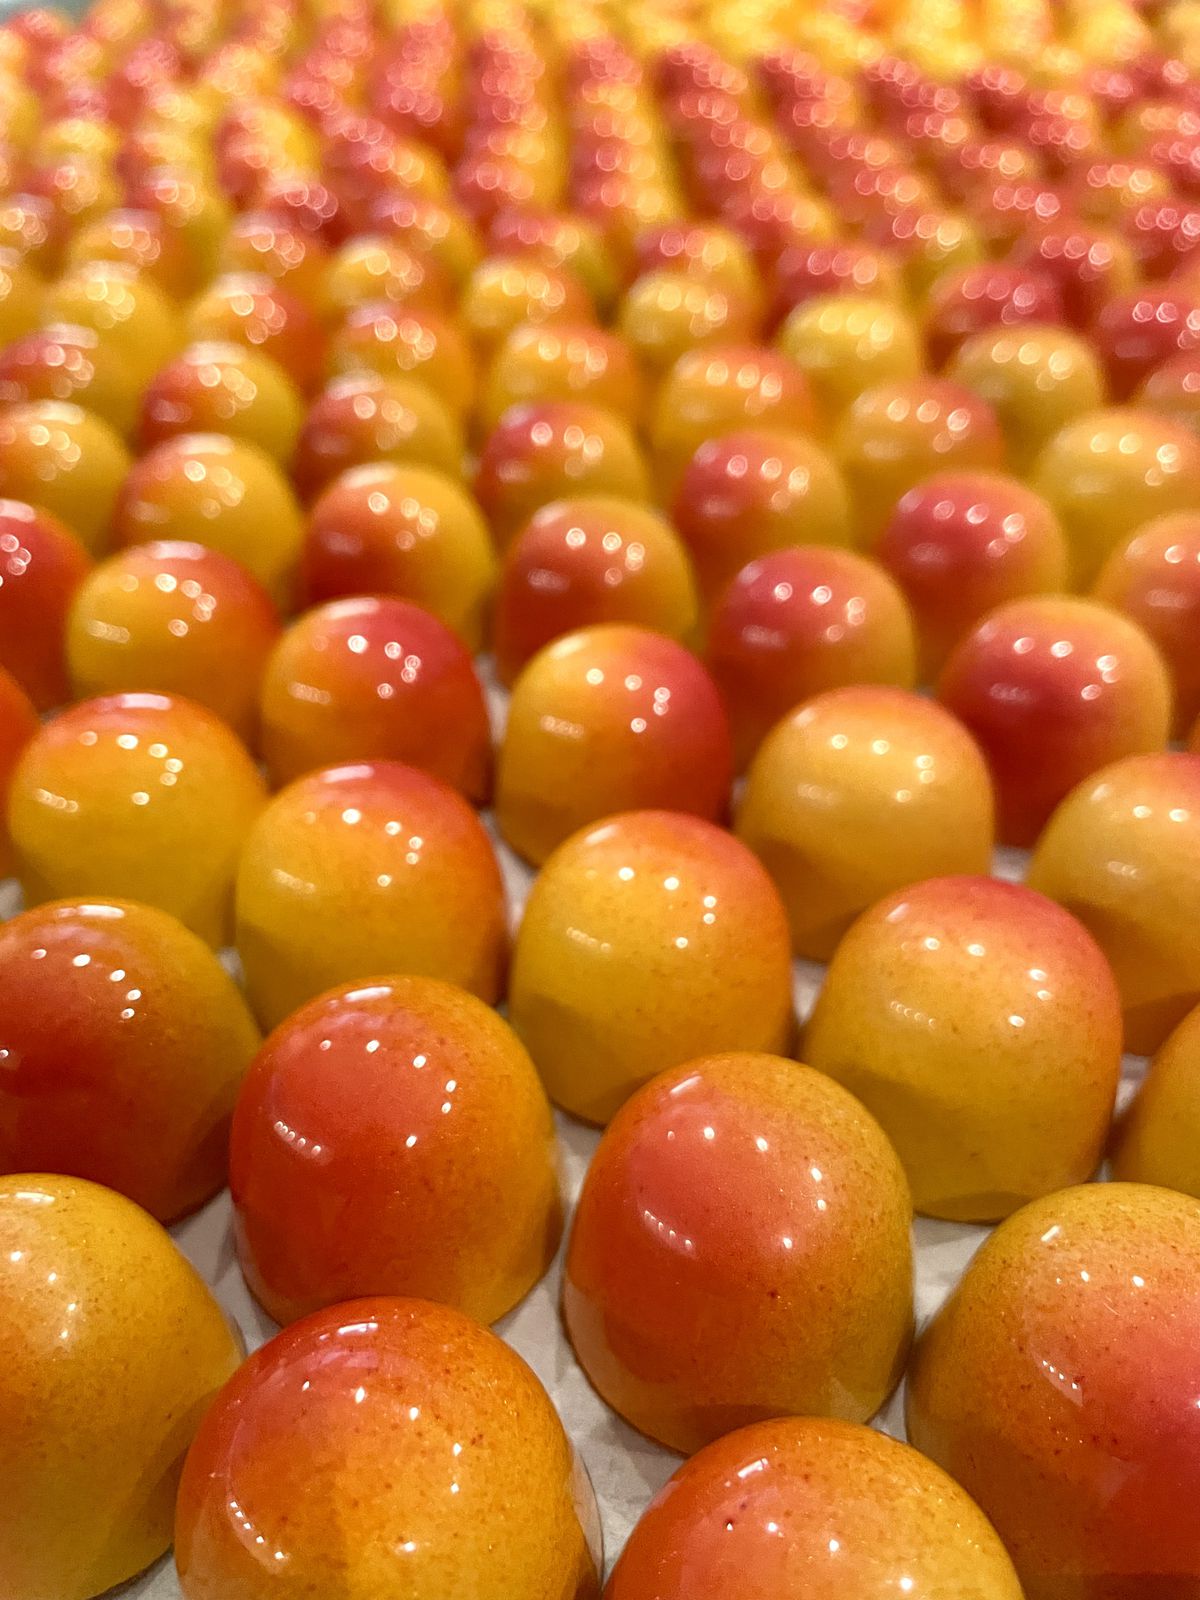 Peach bonbons from Misfit Confections.